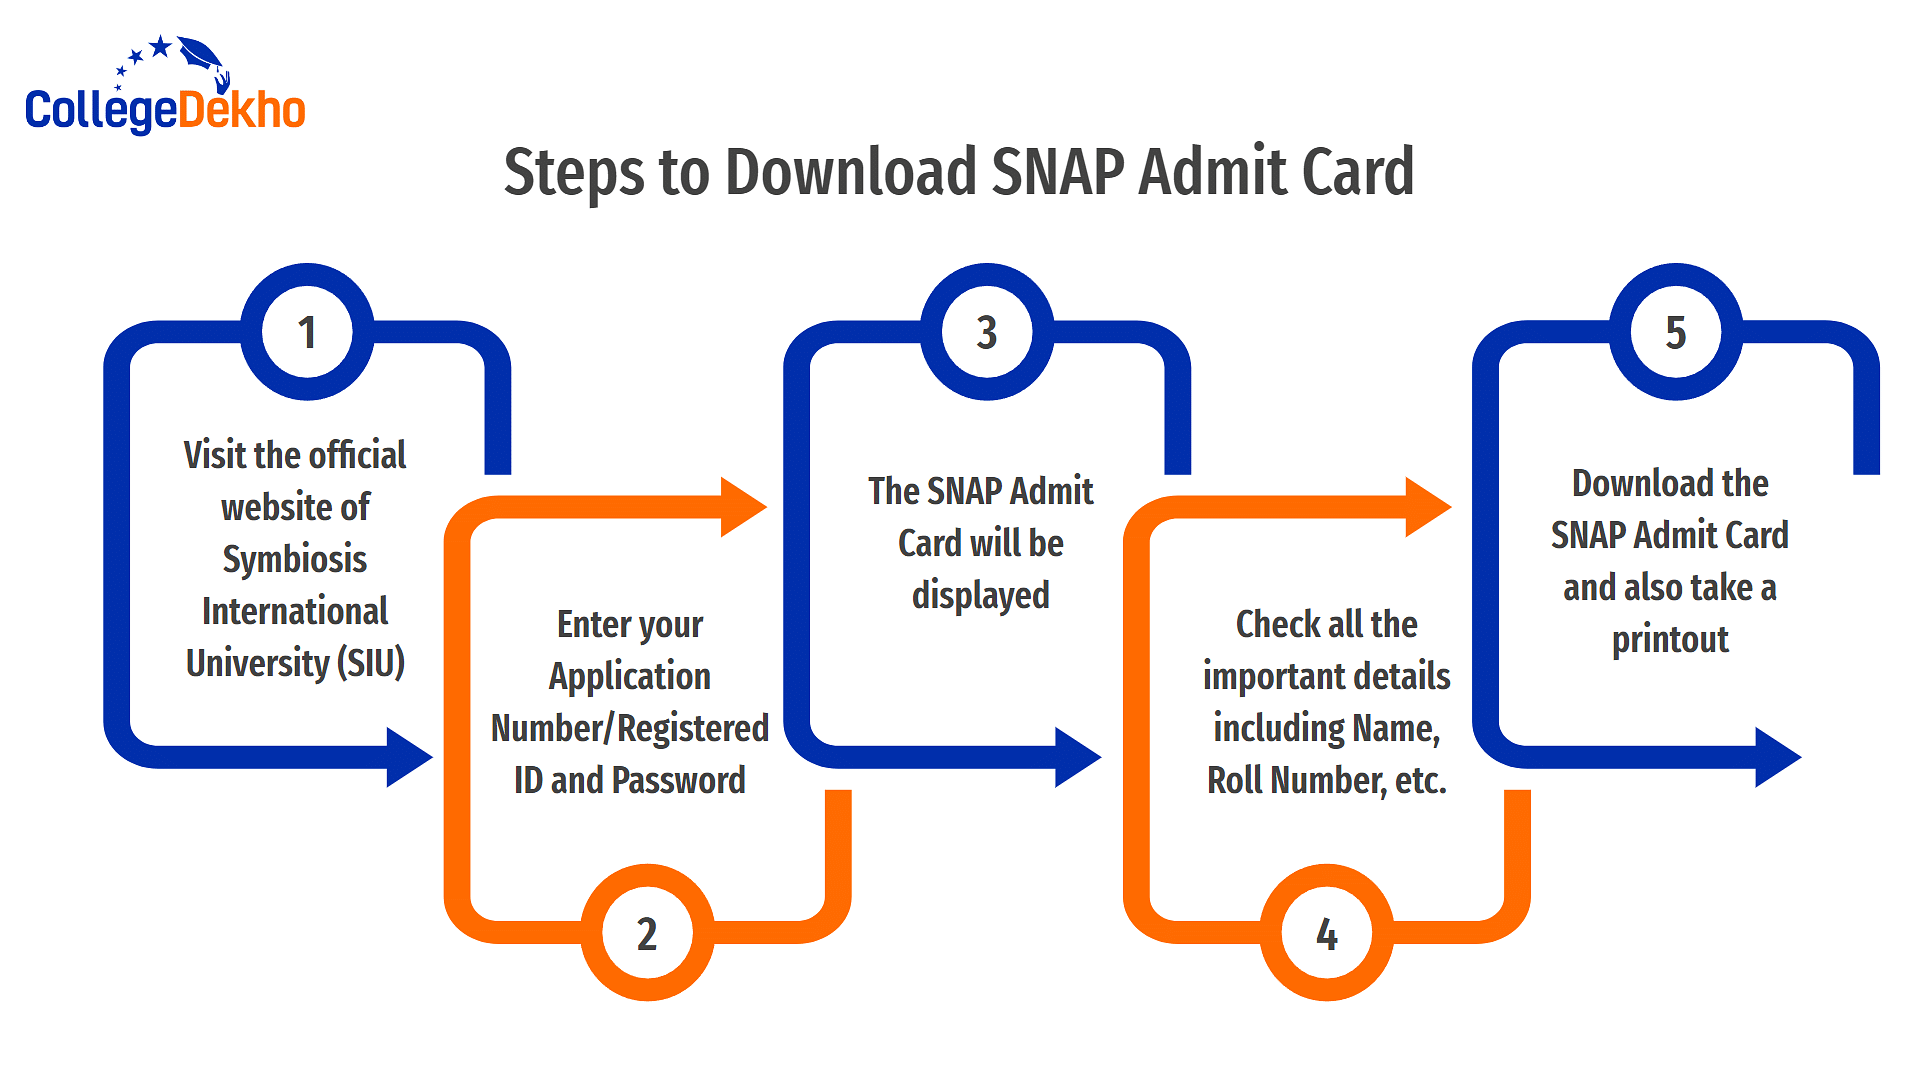 Steps to Download SNAP Admit Card